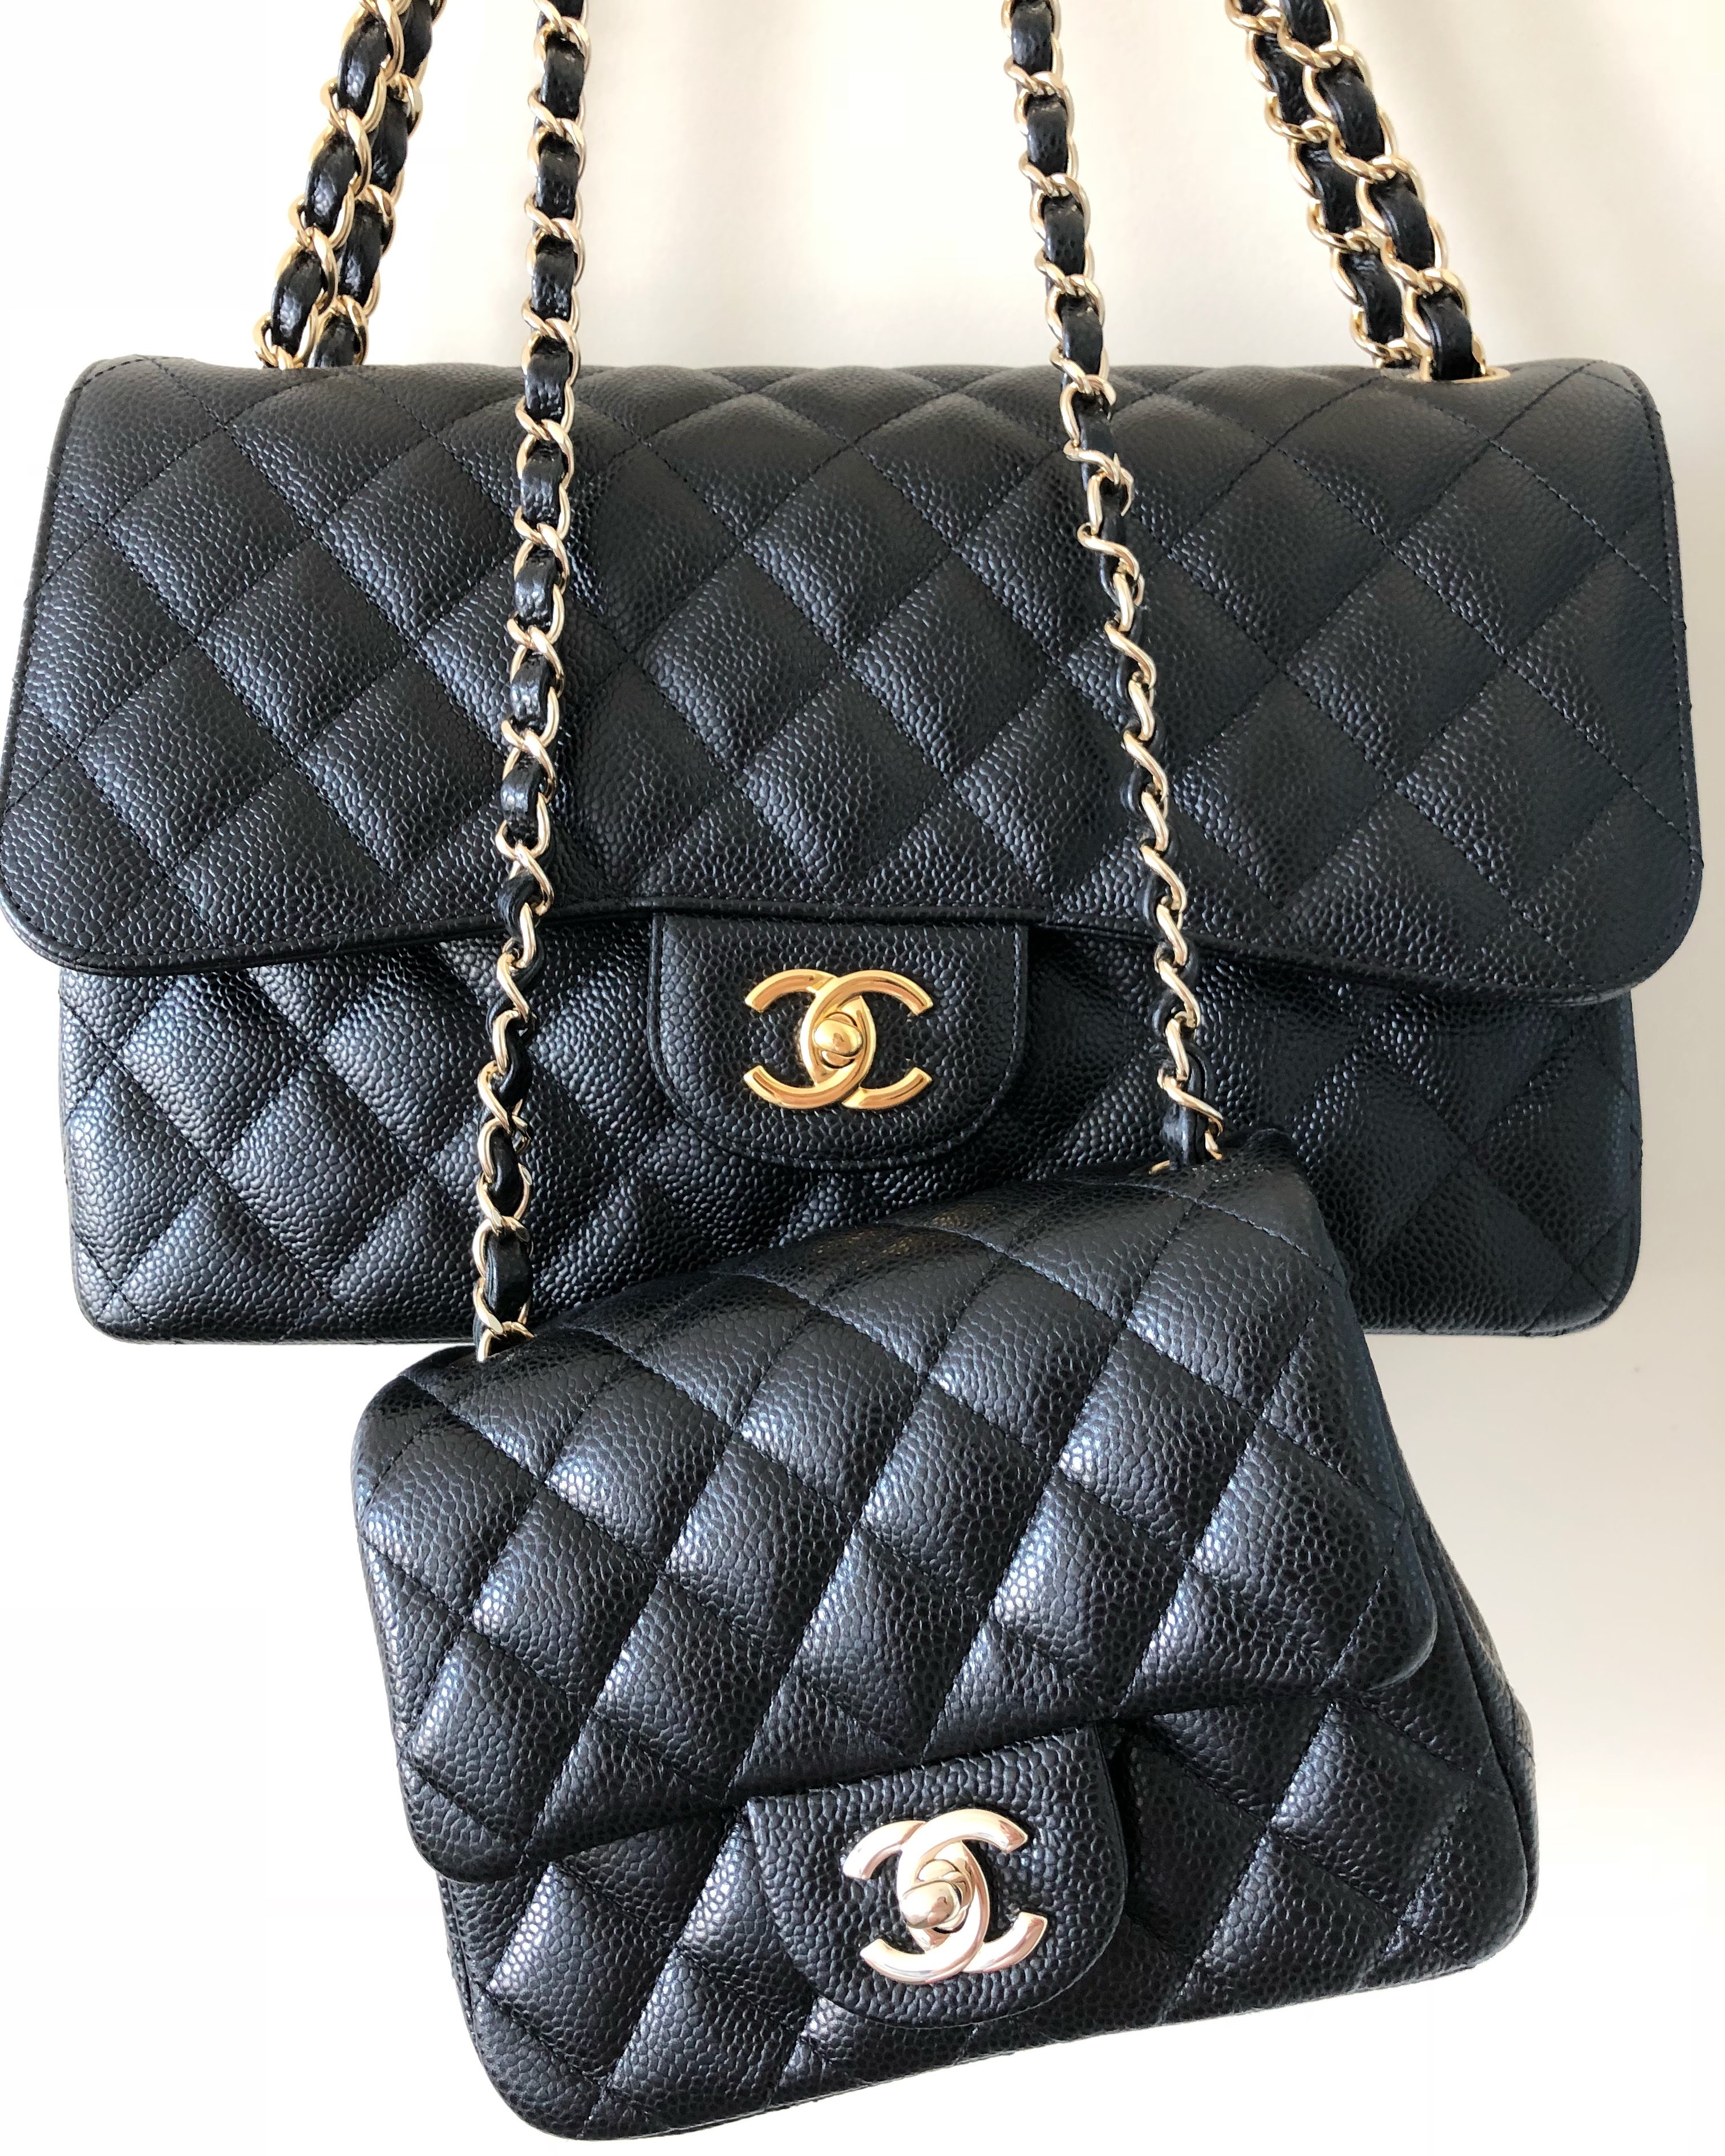 Top 4 tips for buying Chanel